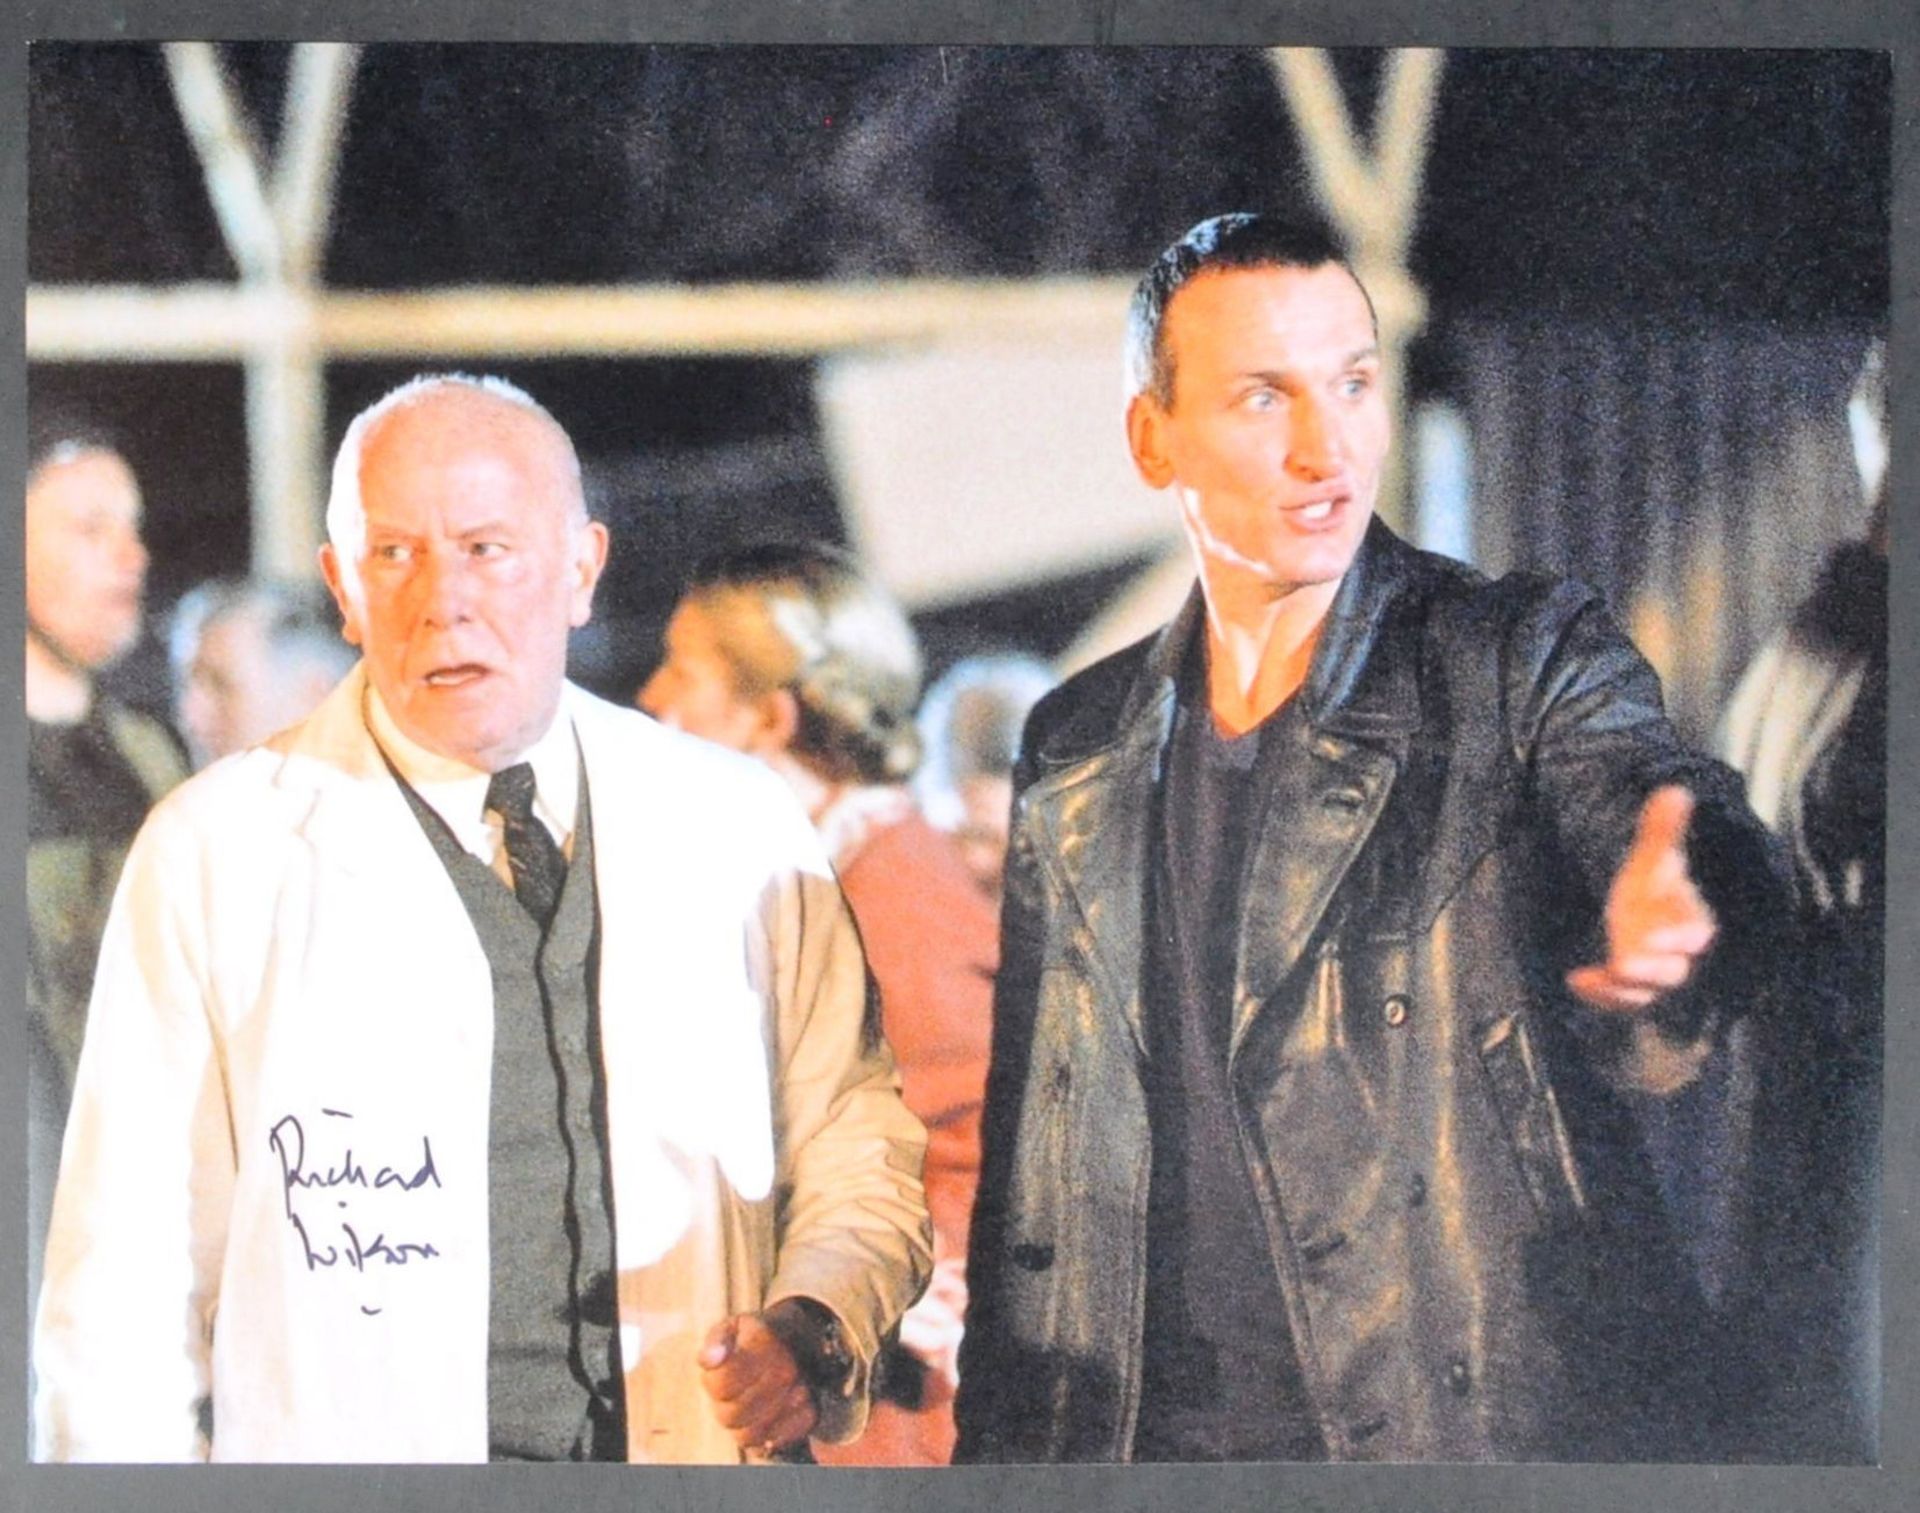 DOCTOR WHO - RICHARD WILSON - LARGE 16X12" SIGNED PHOTOGRAPH